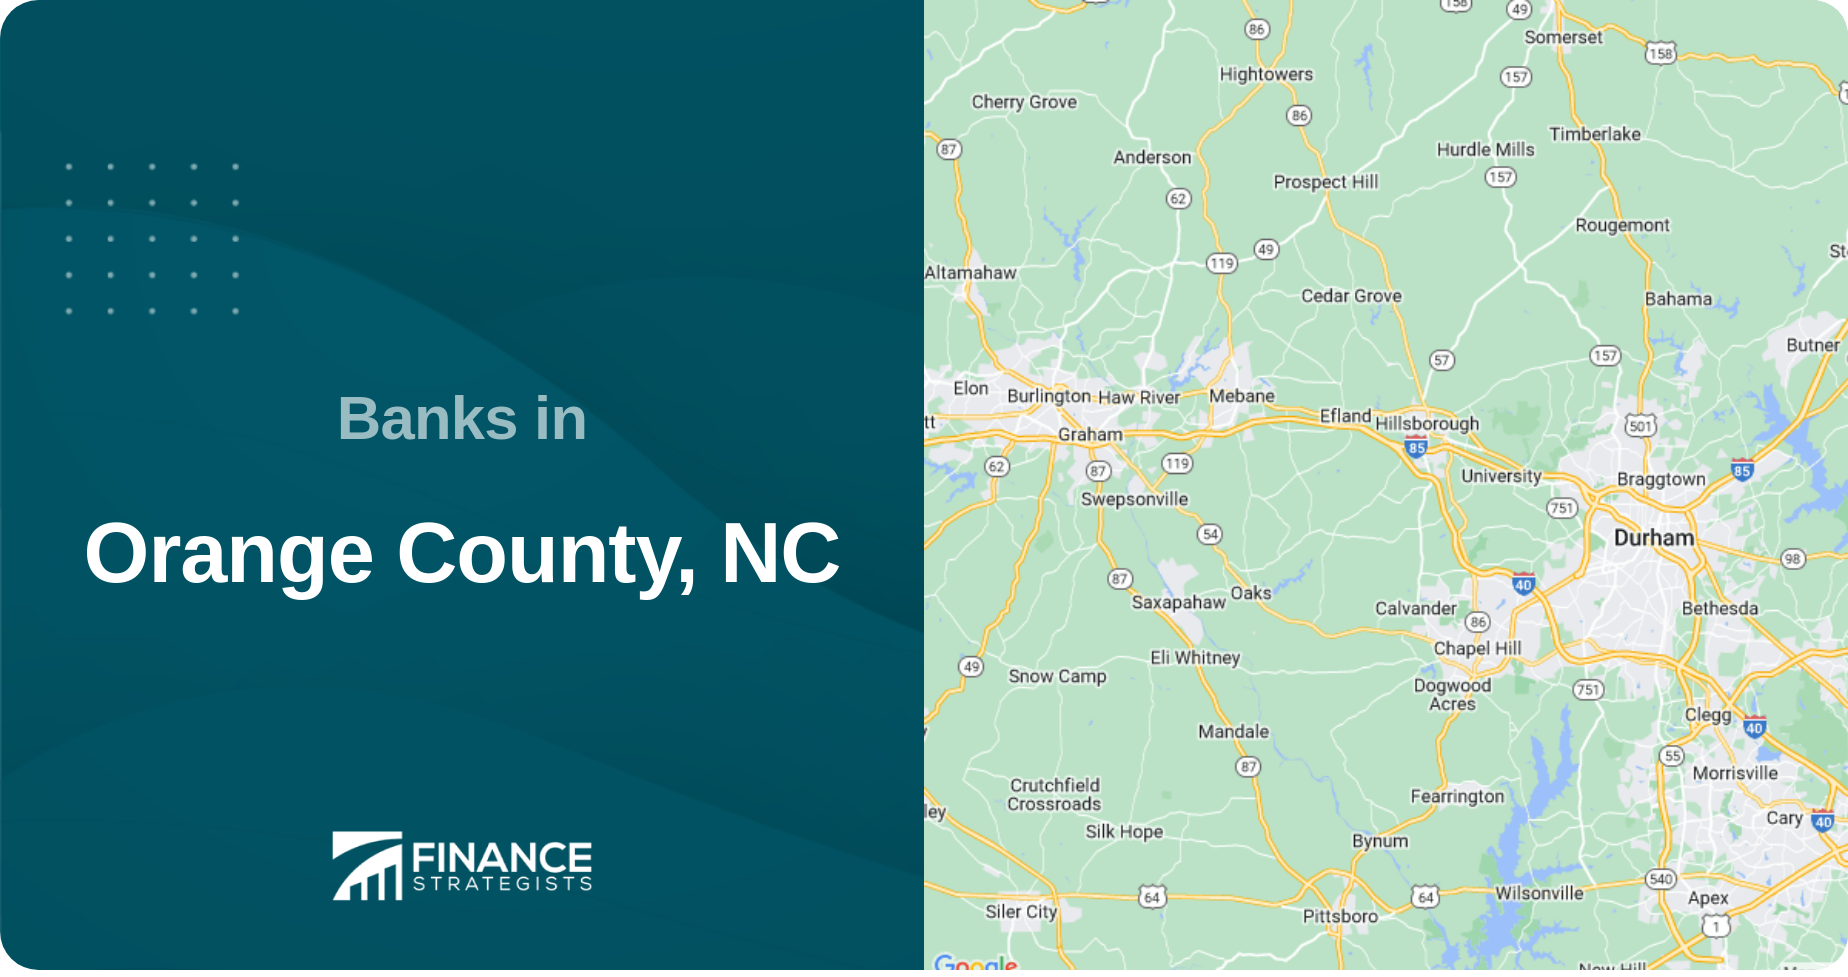 Banks in Orange County, NC